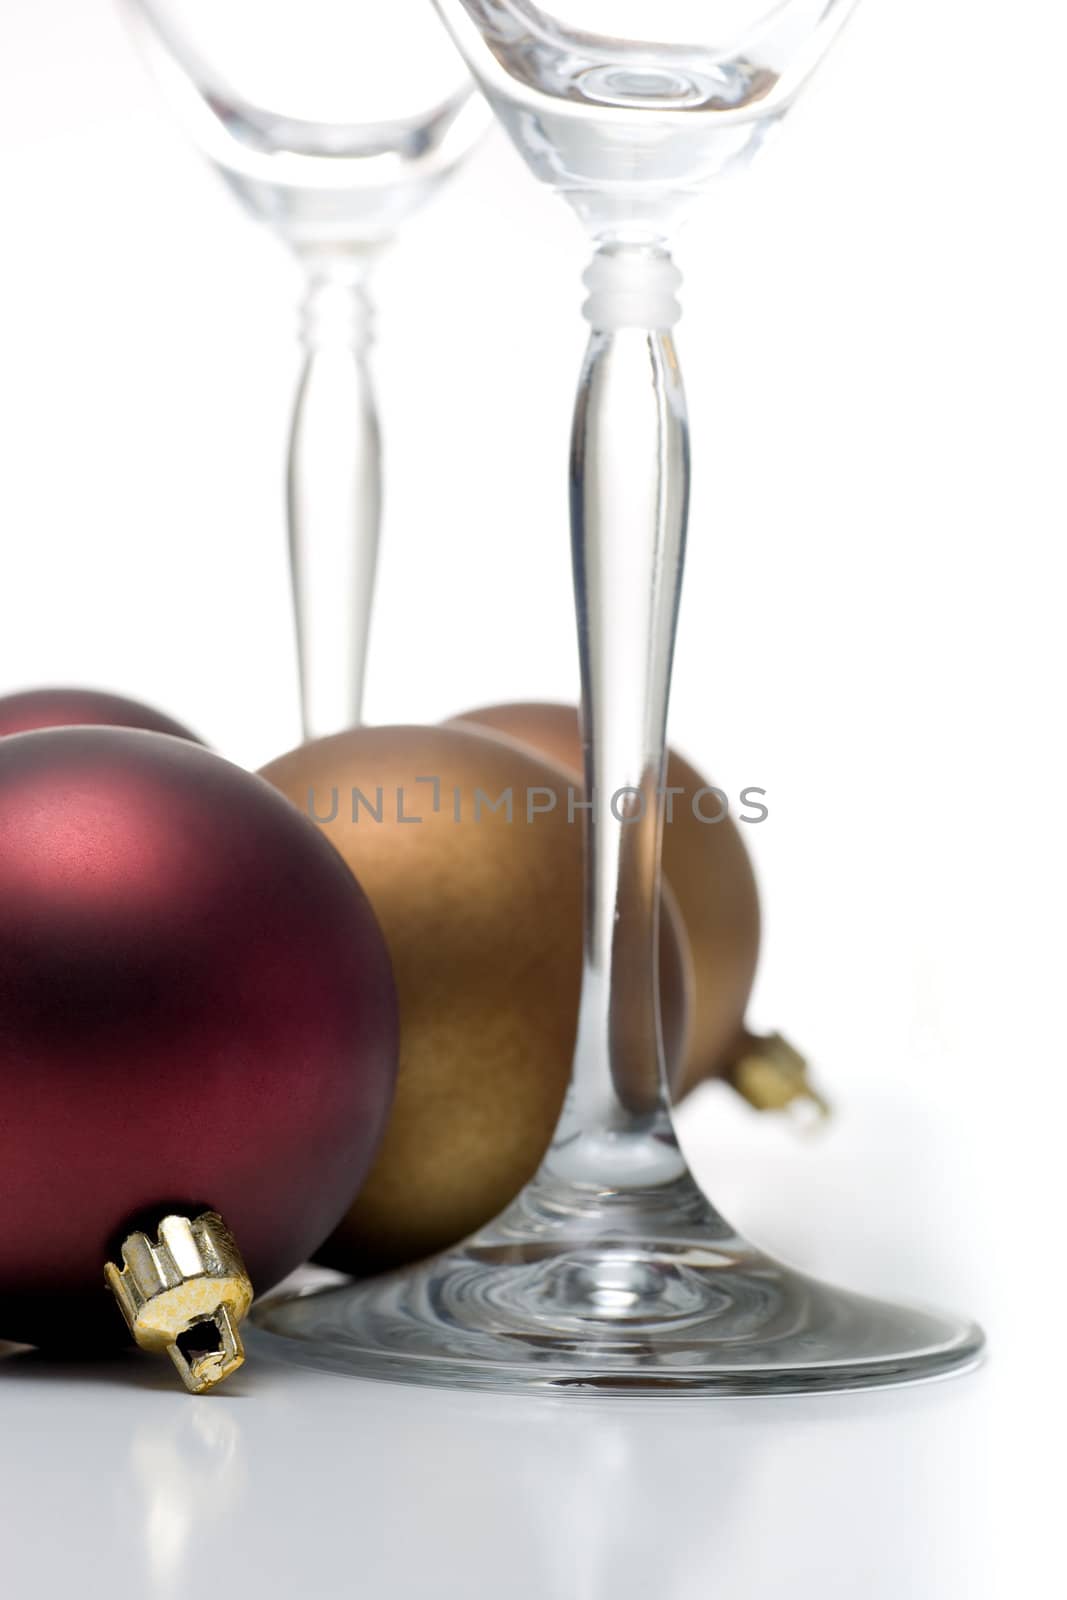 Champagne glasses surrounded by christmas ornaments, isolated on white.